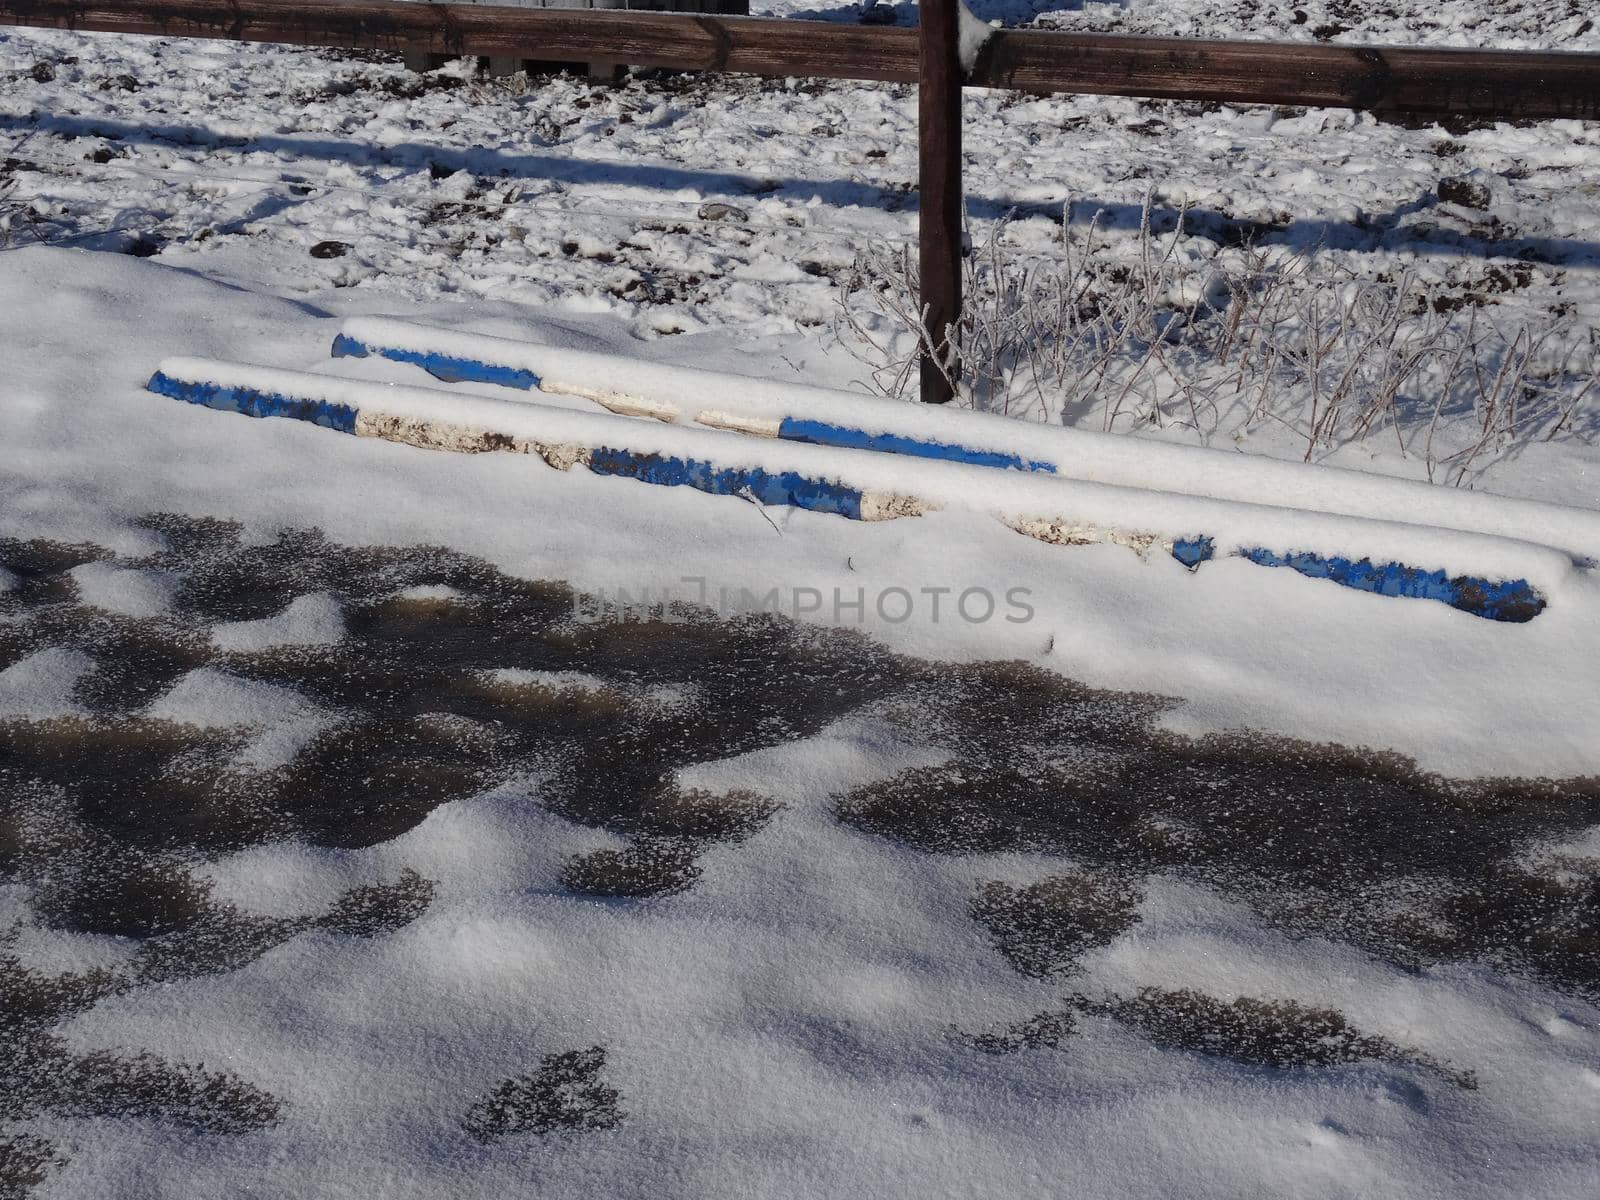 Blue and white obstacle bars covered with snow by Luise123